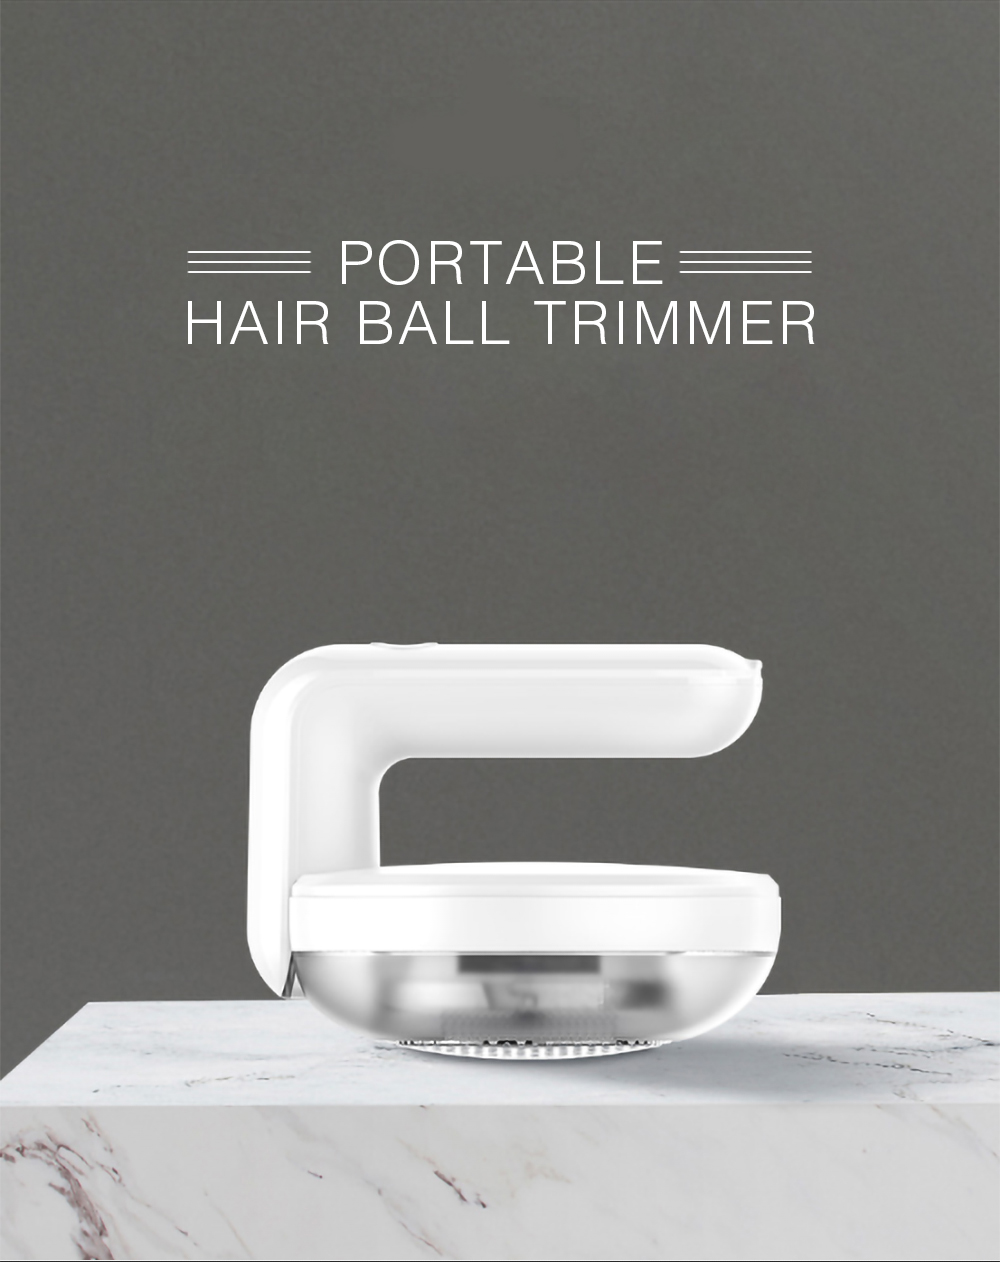 Portable Hair Ball Trimmer Sweater Shaver Lint Remover